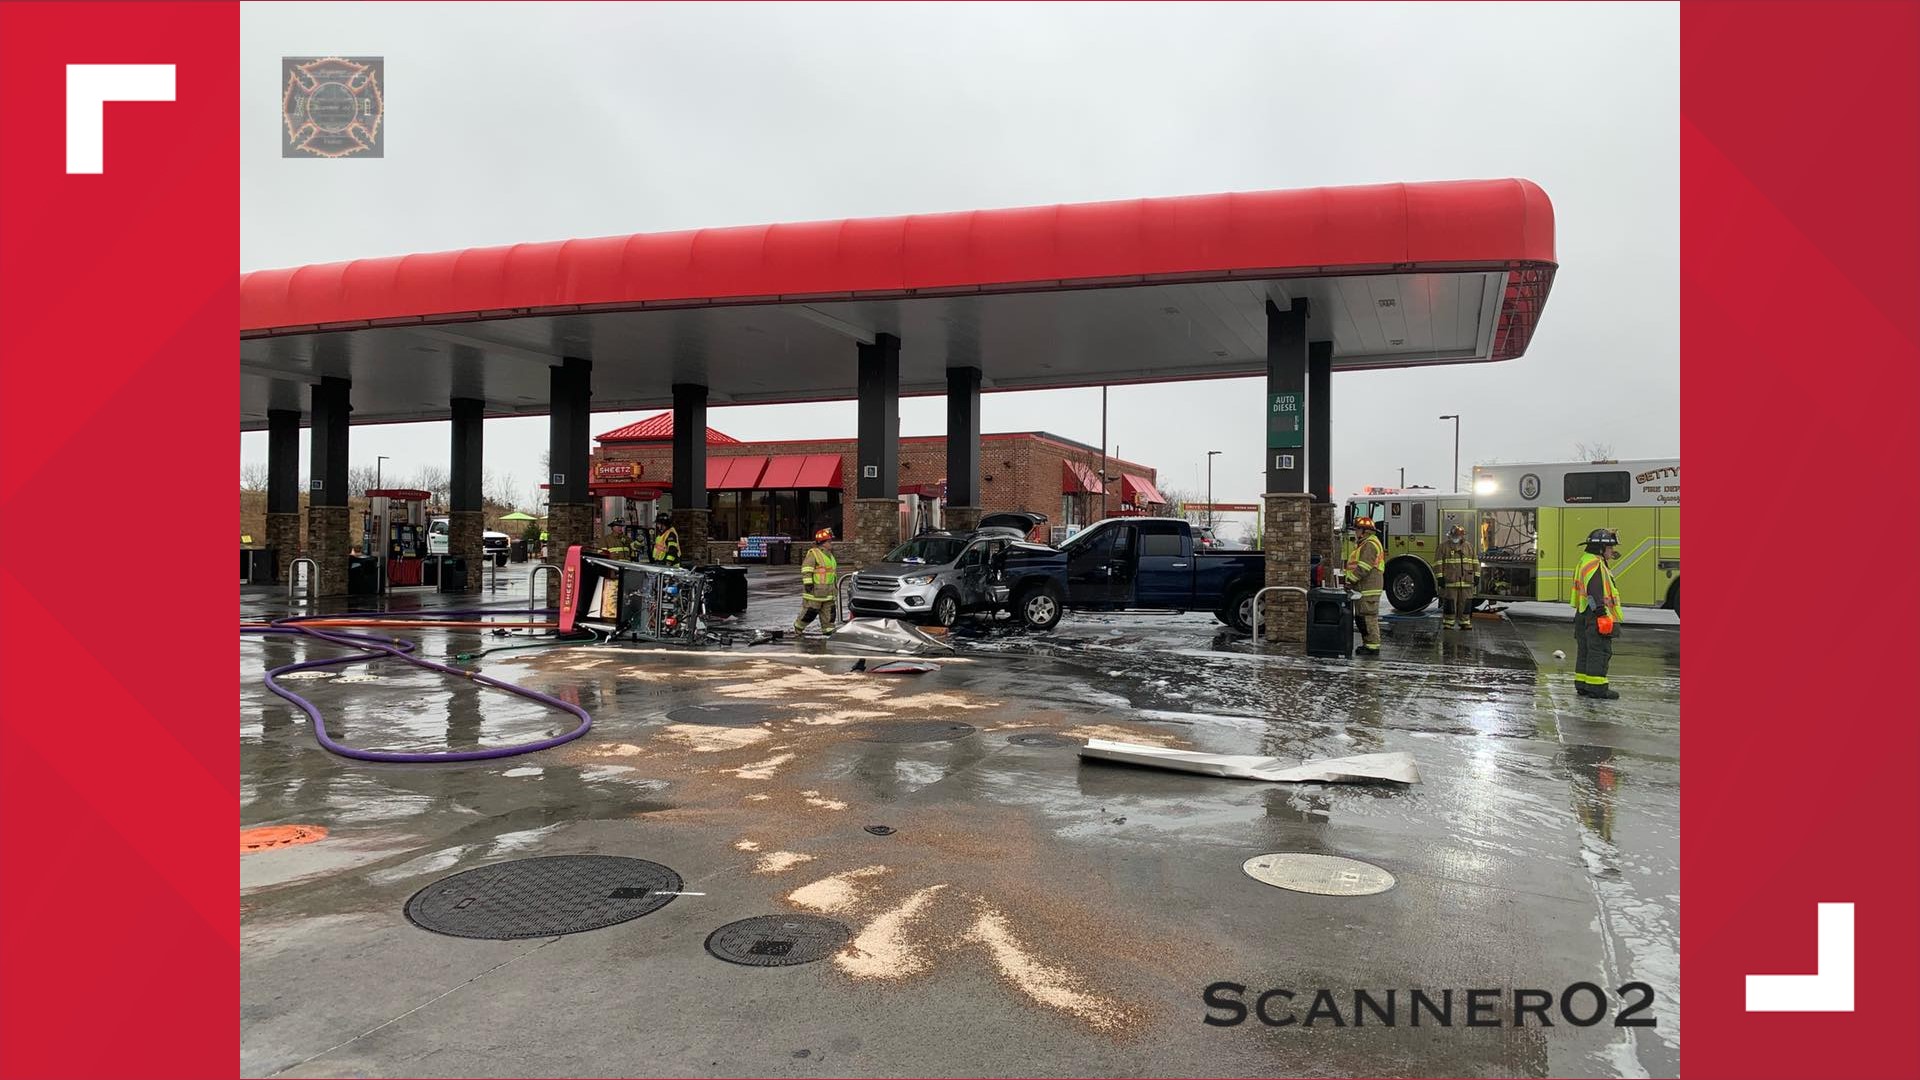 The multi-vehicle crash was reported at 9:22 a.m. at the Sheetz located on Camp Letterman Drive. Two people were injured.